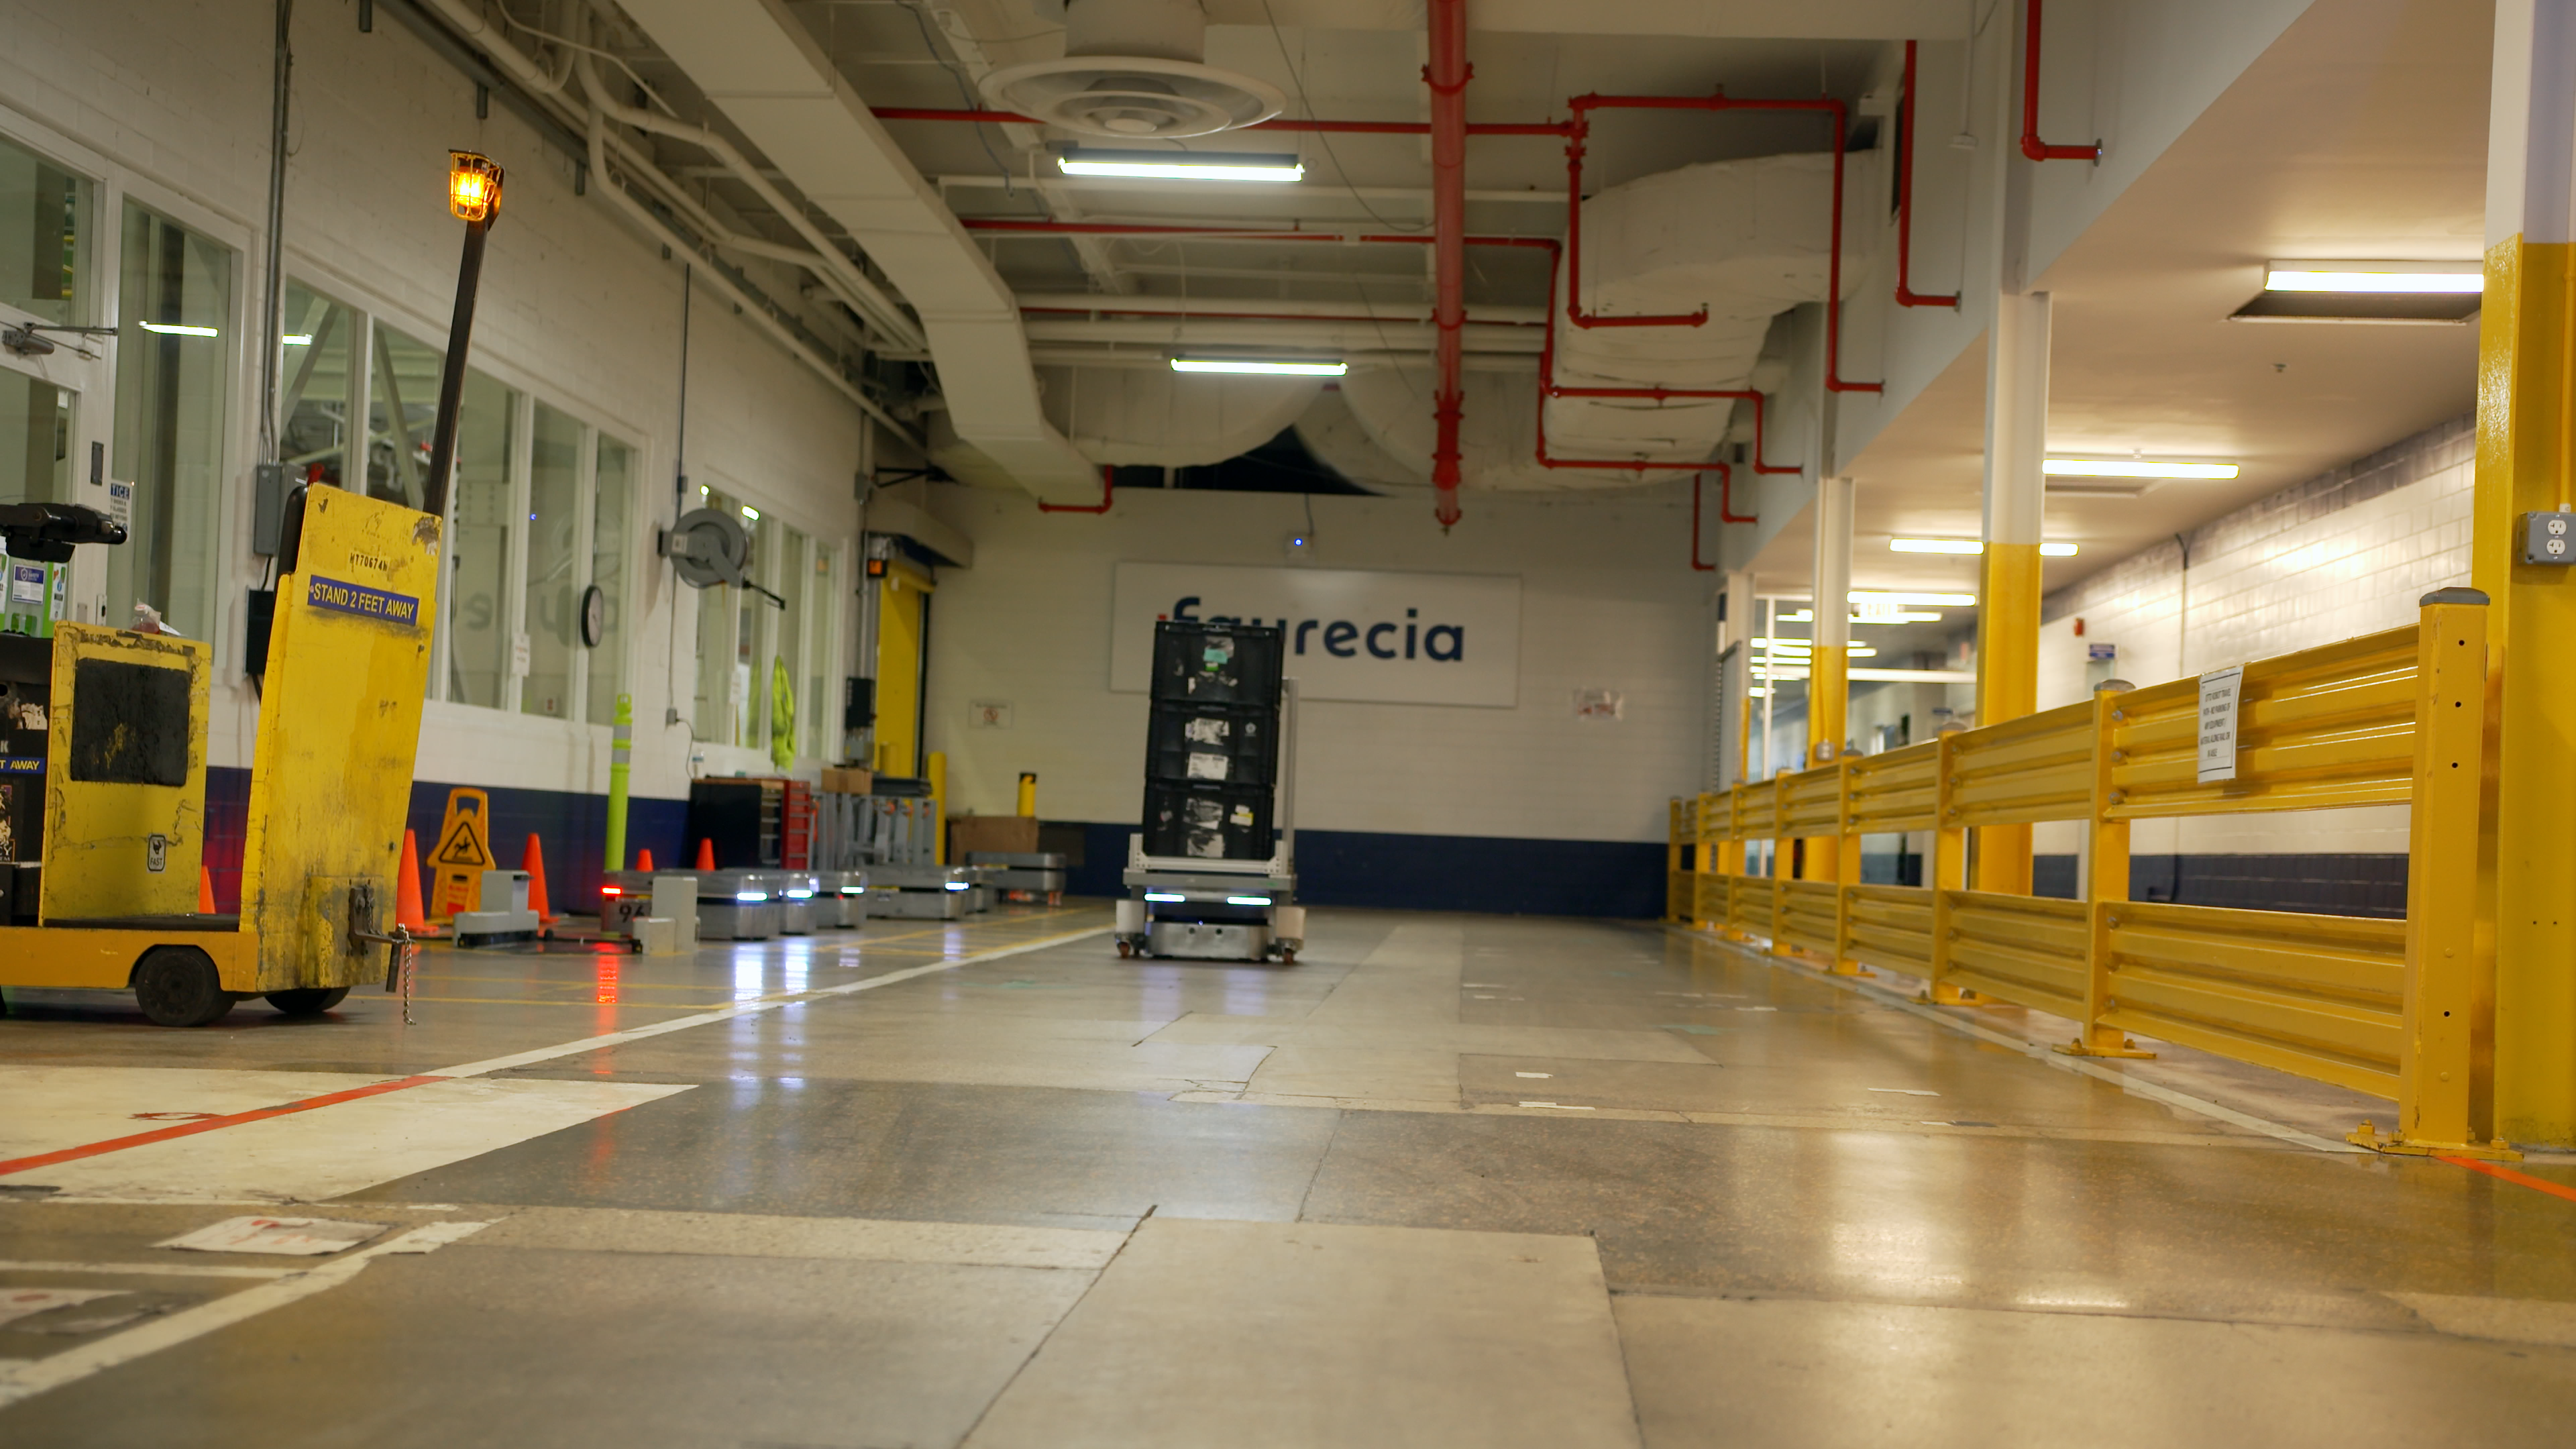 Image 4: OTTO 100 works in Faurecia’s factory without operator intervention, helping the company move toward lights-out manufacturing and combating the labor shortage.